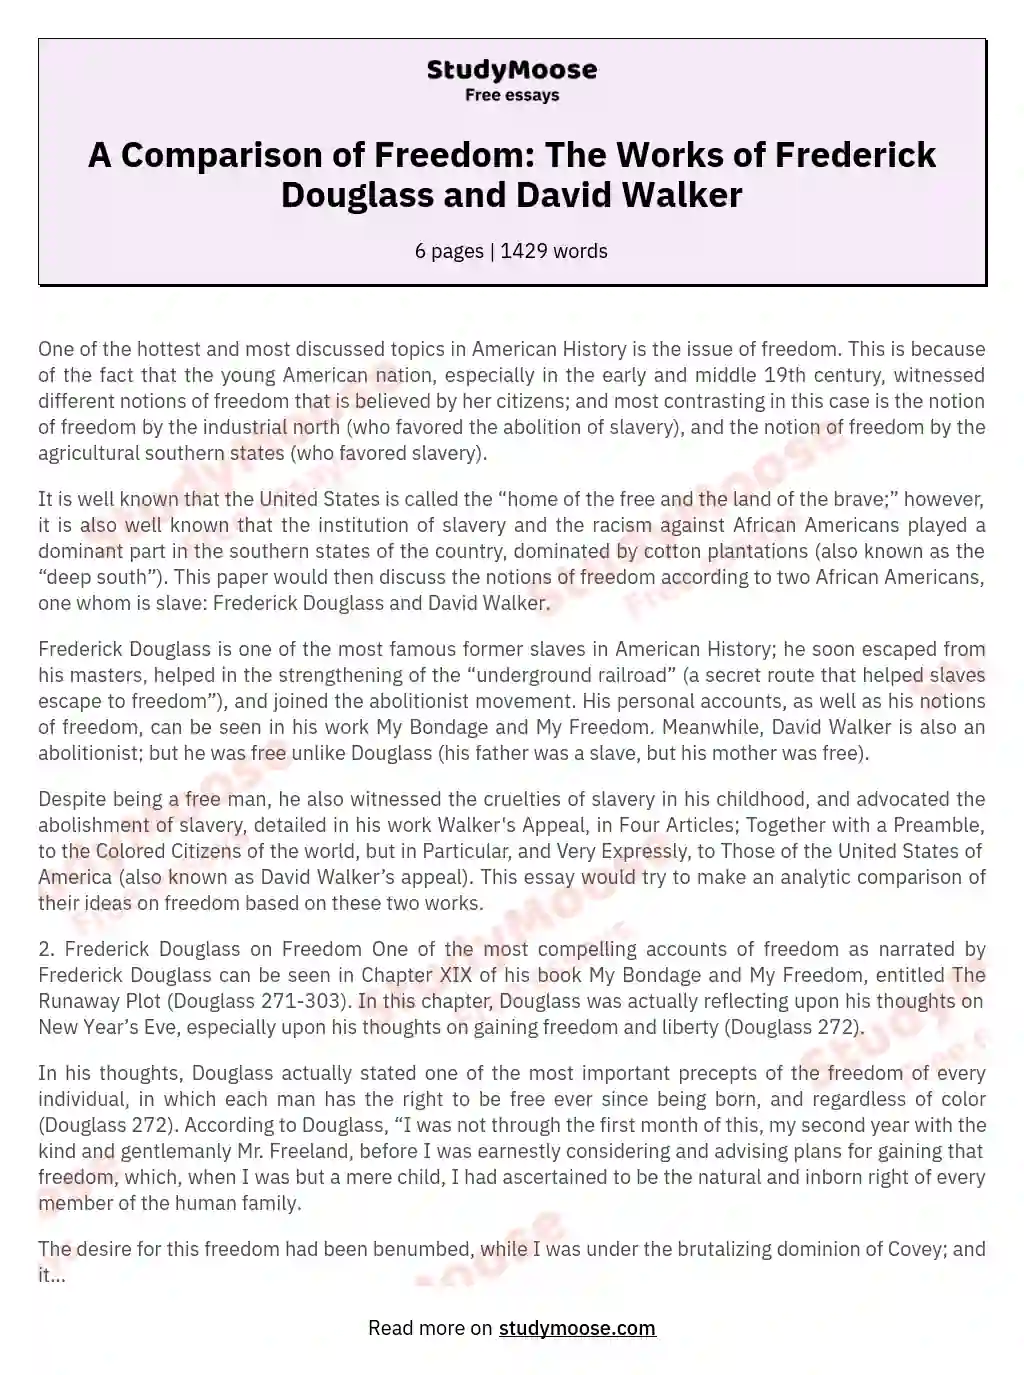 A Comparison of Freedom: The Works of Frederick Douglass and David Walker essay